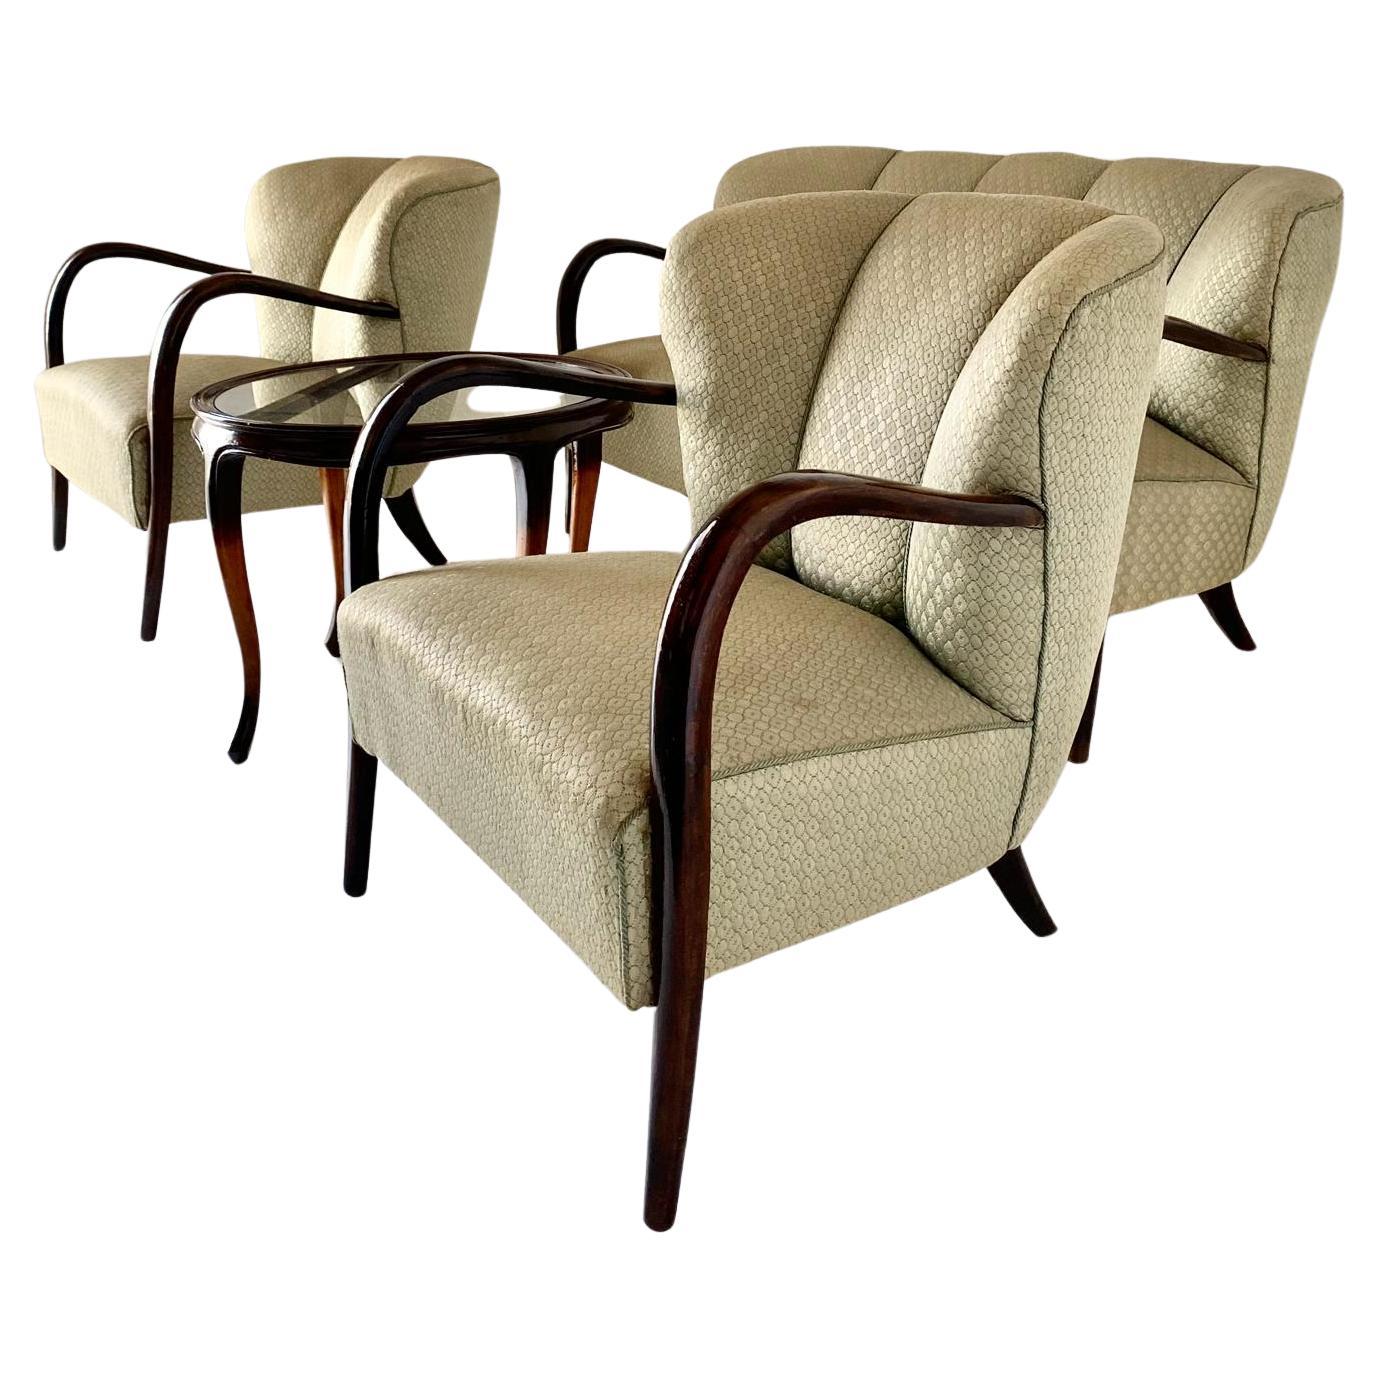 A rare 1950s Art Deco style living room set by Malatesta and Mason. Beautifully made in Italy, the set consists of two armchairs and a two-seater sofa and a curved solid wood coffee table with glass top. Both the armchairs and the sofa still have